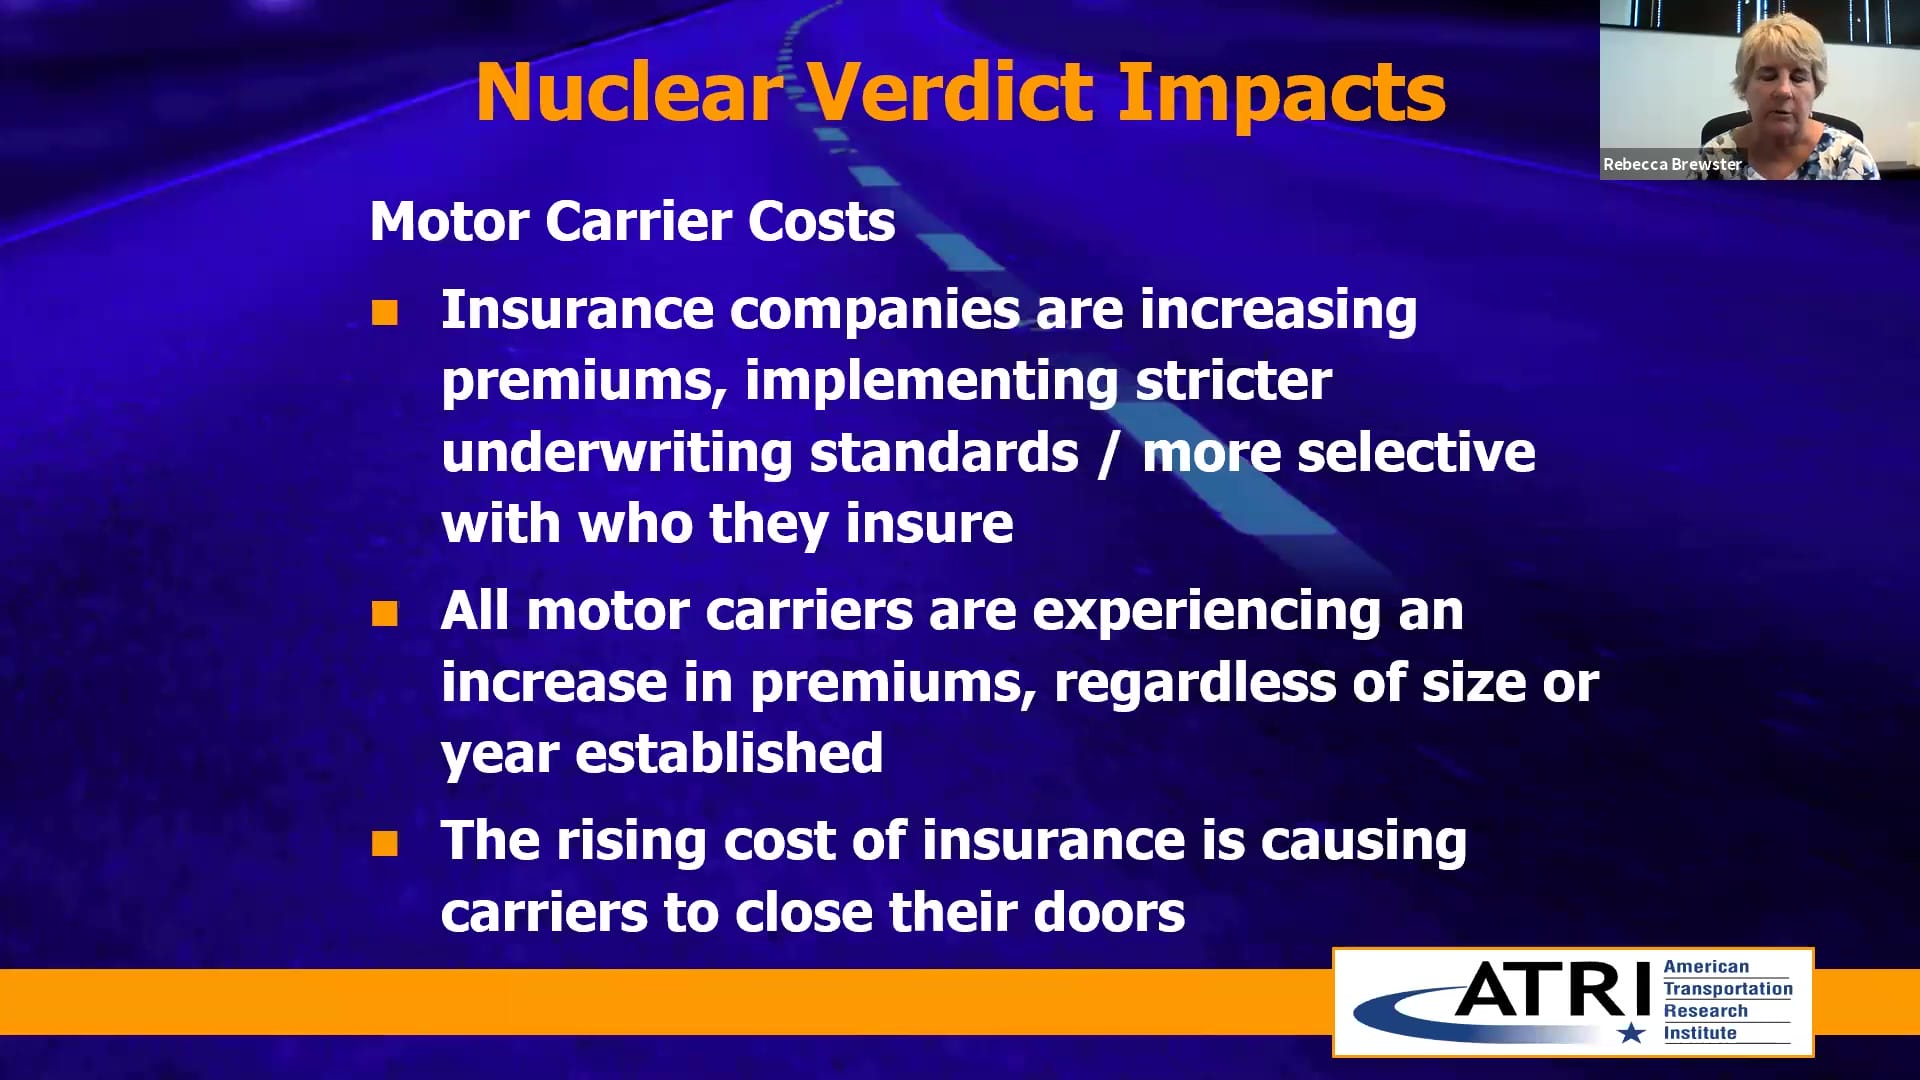 Trucking Industry Concerns 2020 from ATRI Nuclear Verdict Impacts